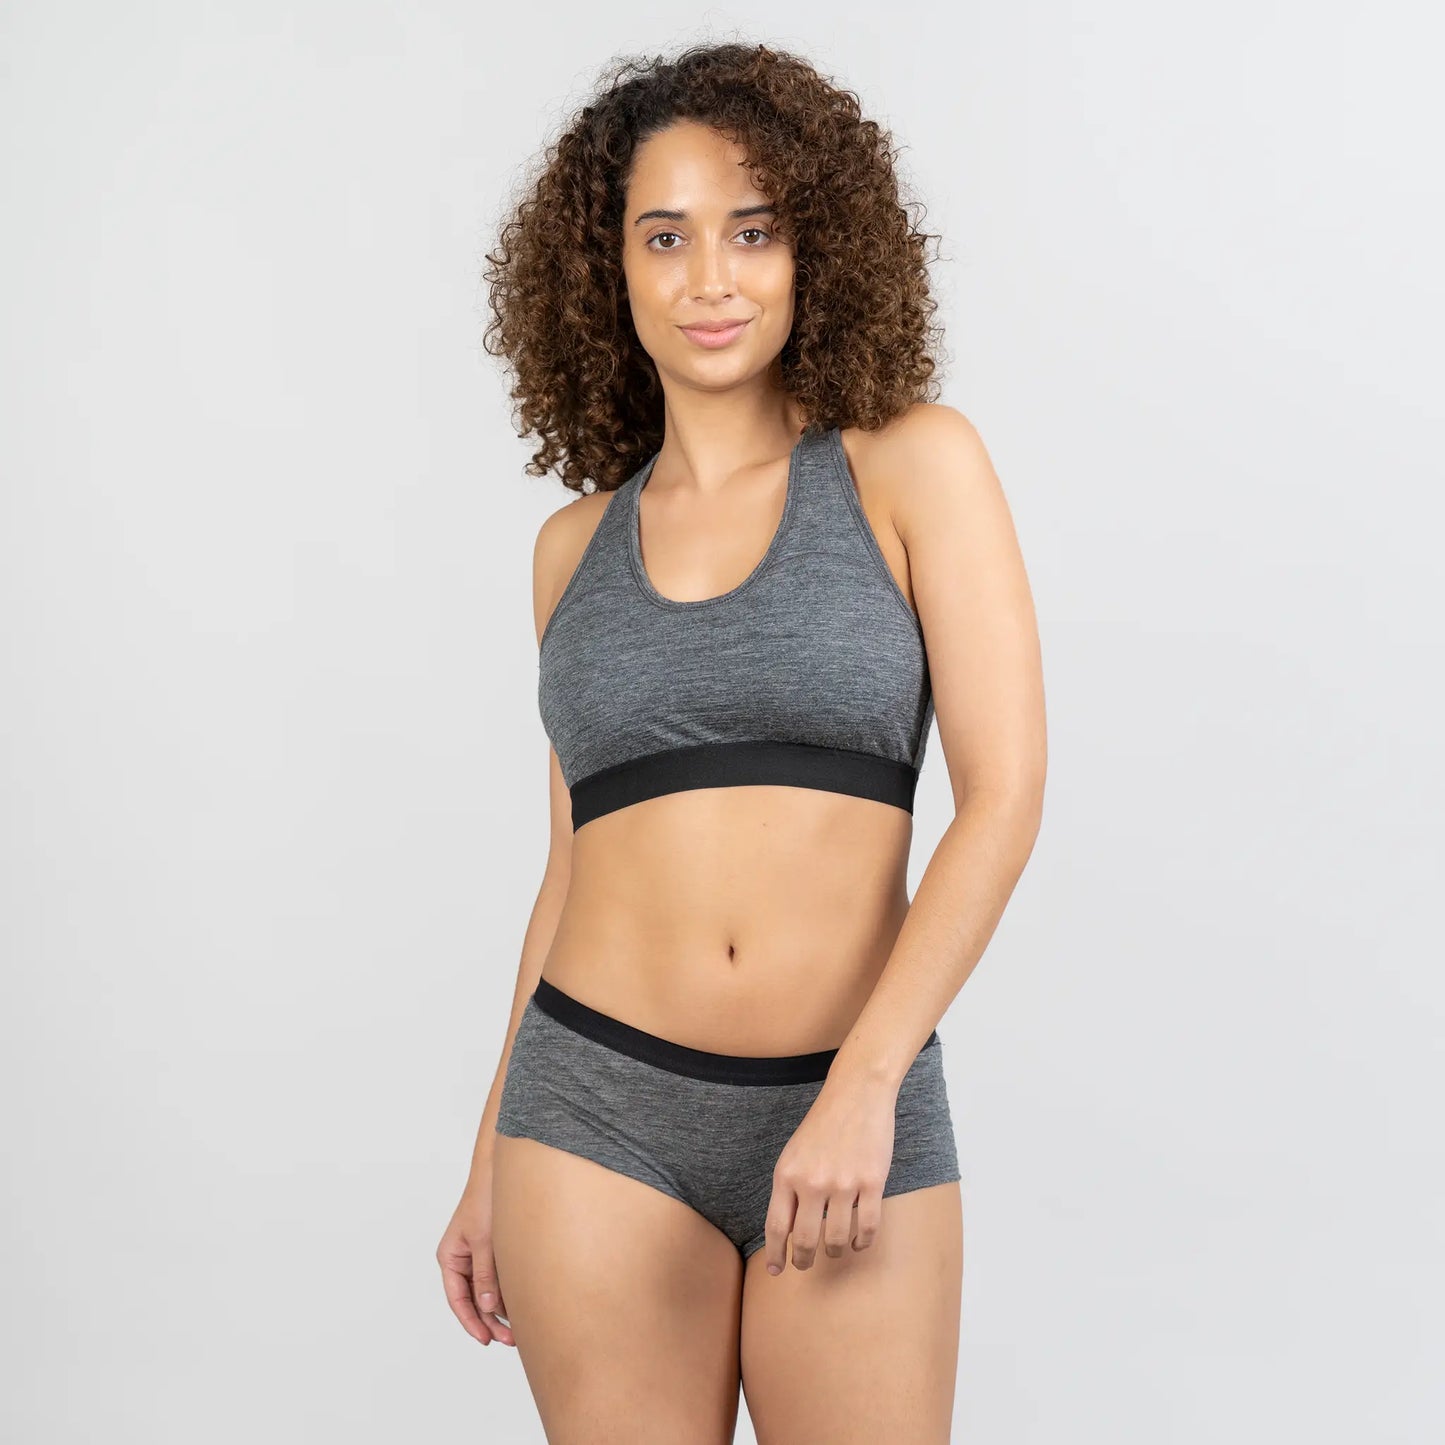  womens eco frriendly panties ultralight color gray